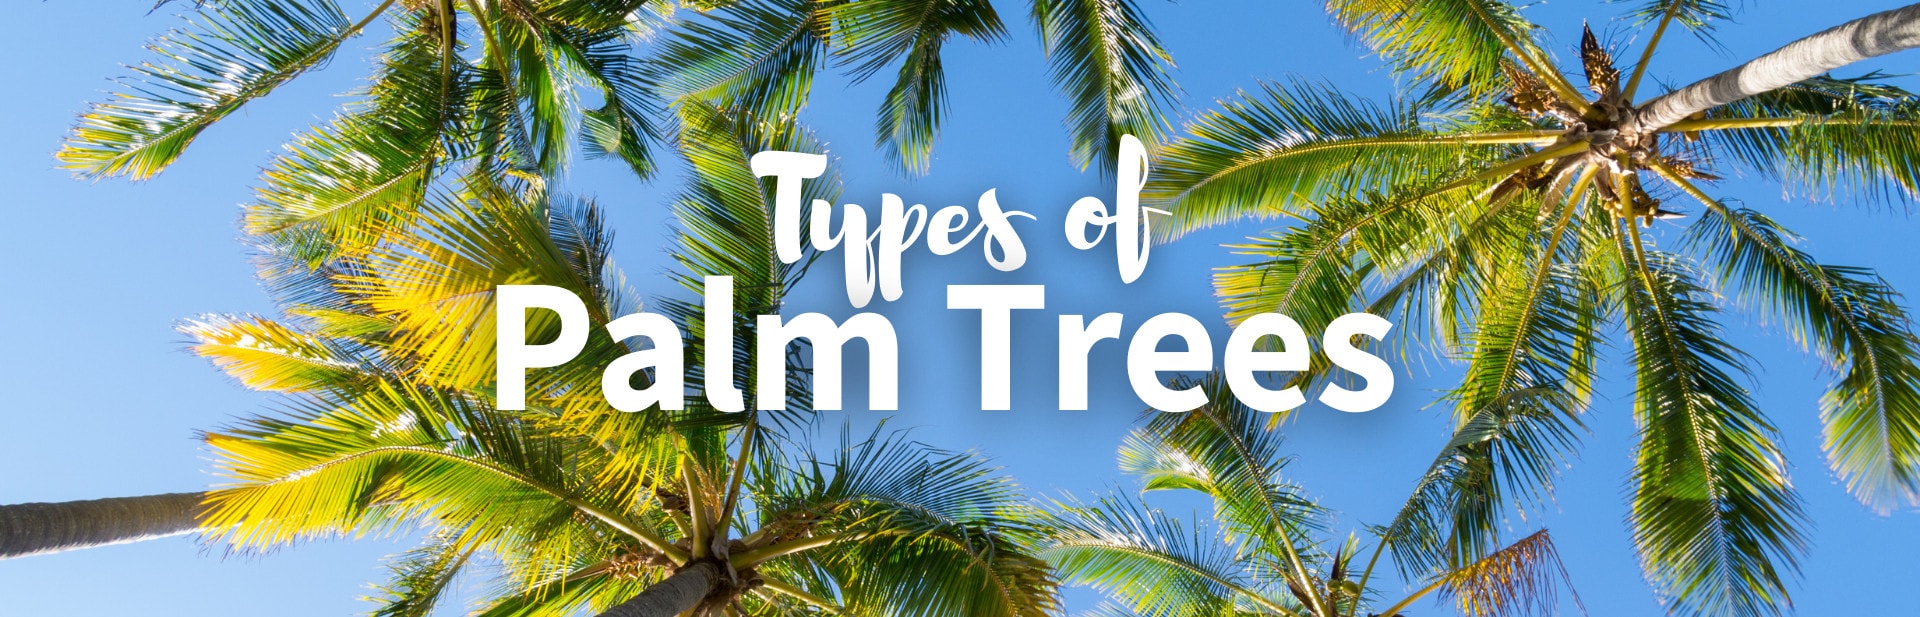 39 Types of Palm Trees: The Tall, The Small, and The Weird